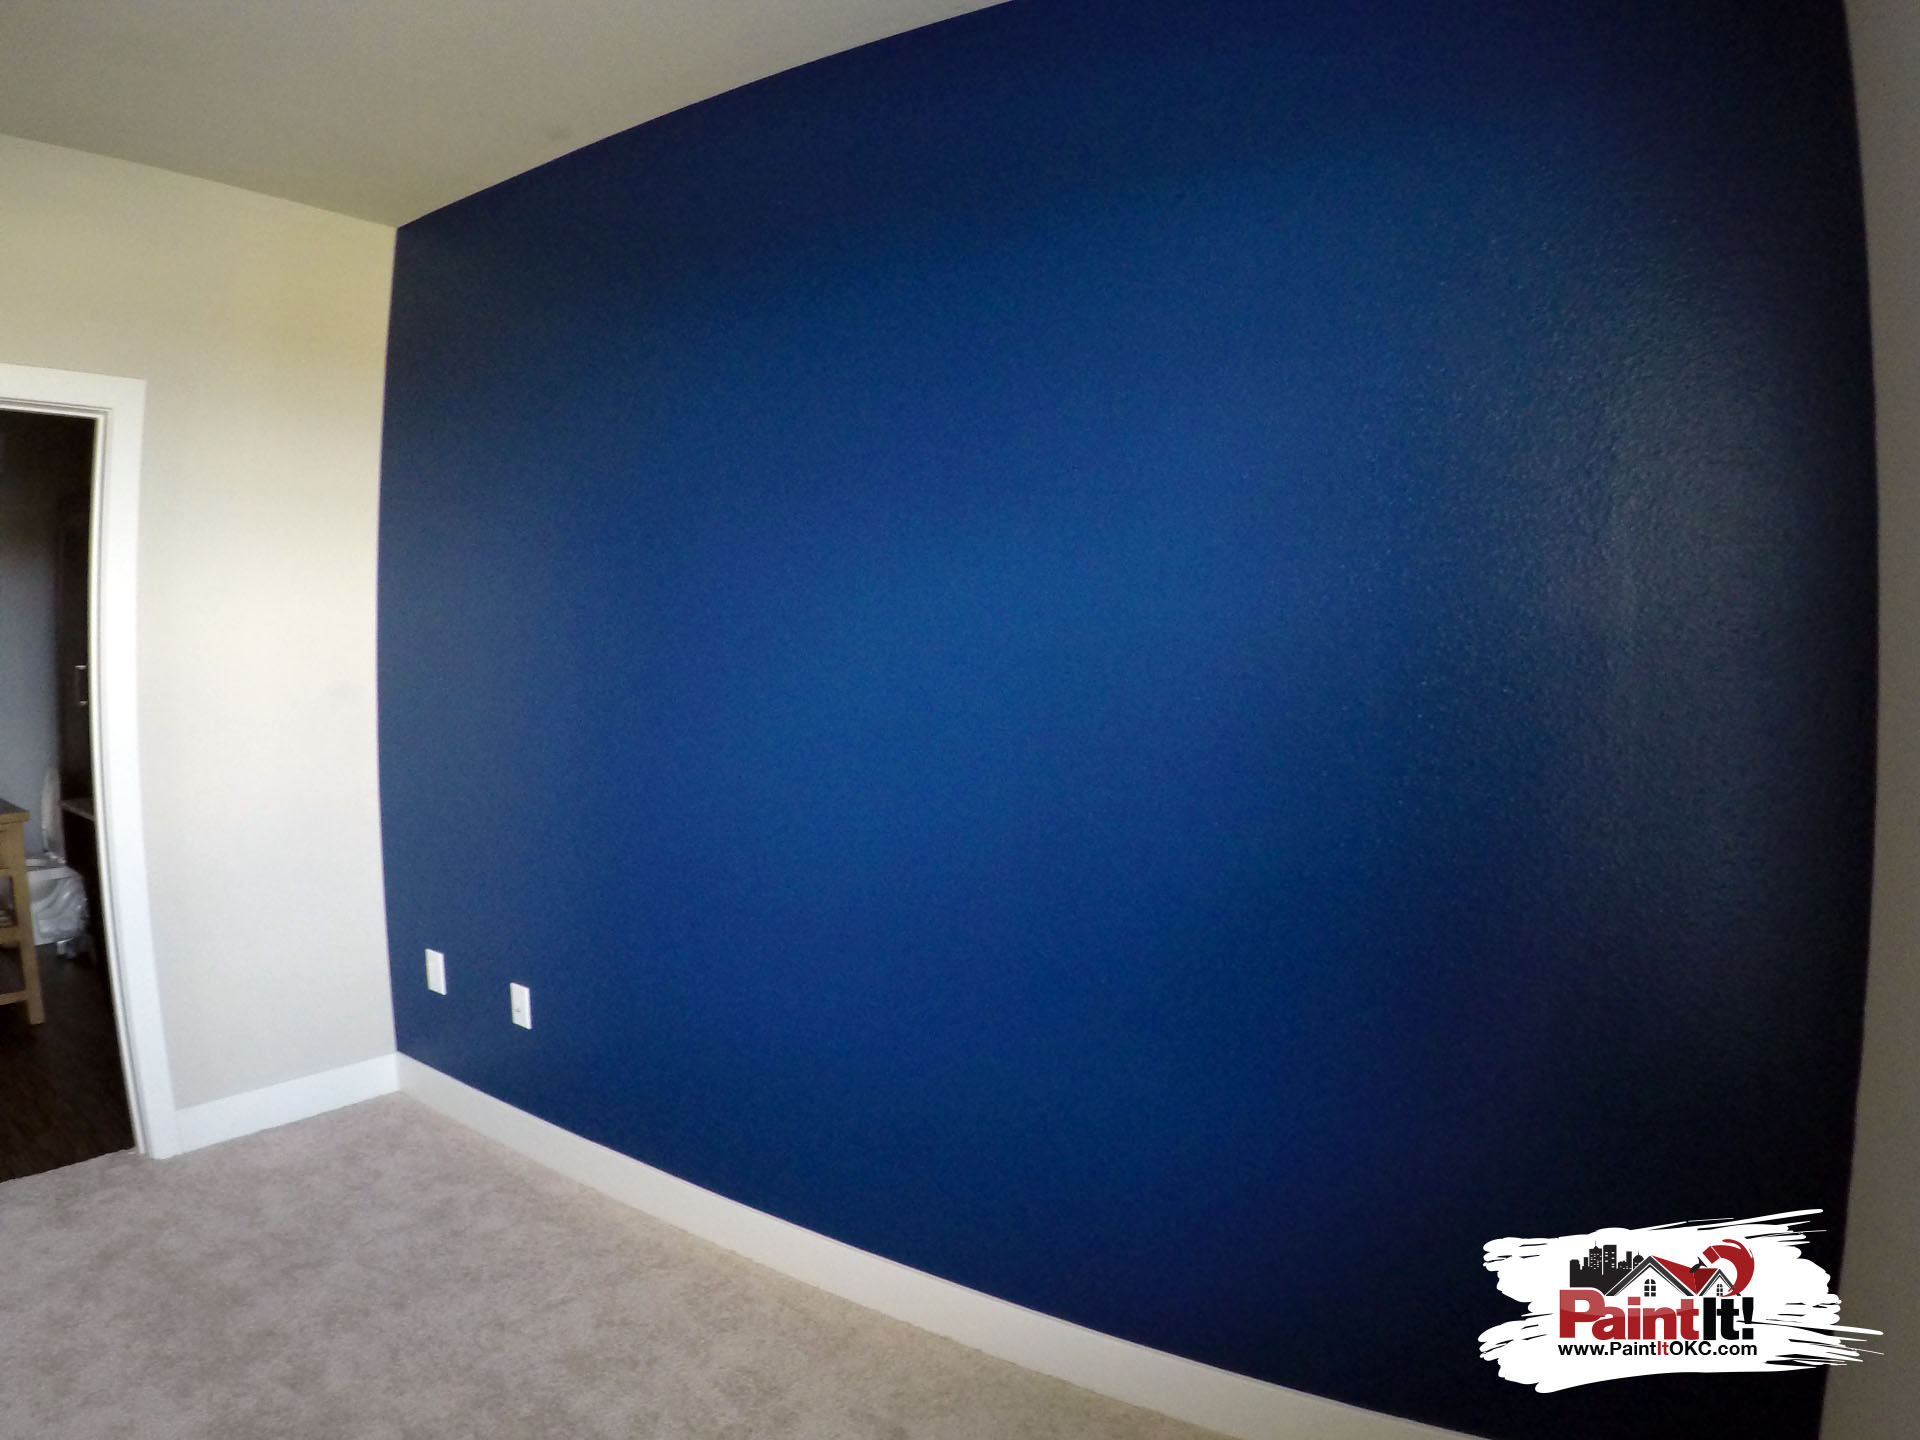 Paint It OKC did some interior painting in Norman, OK that had blue walls.